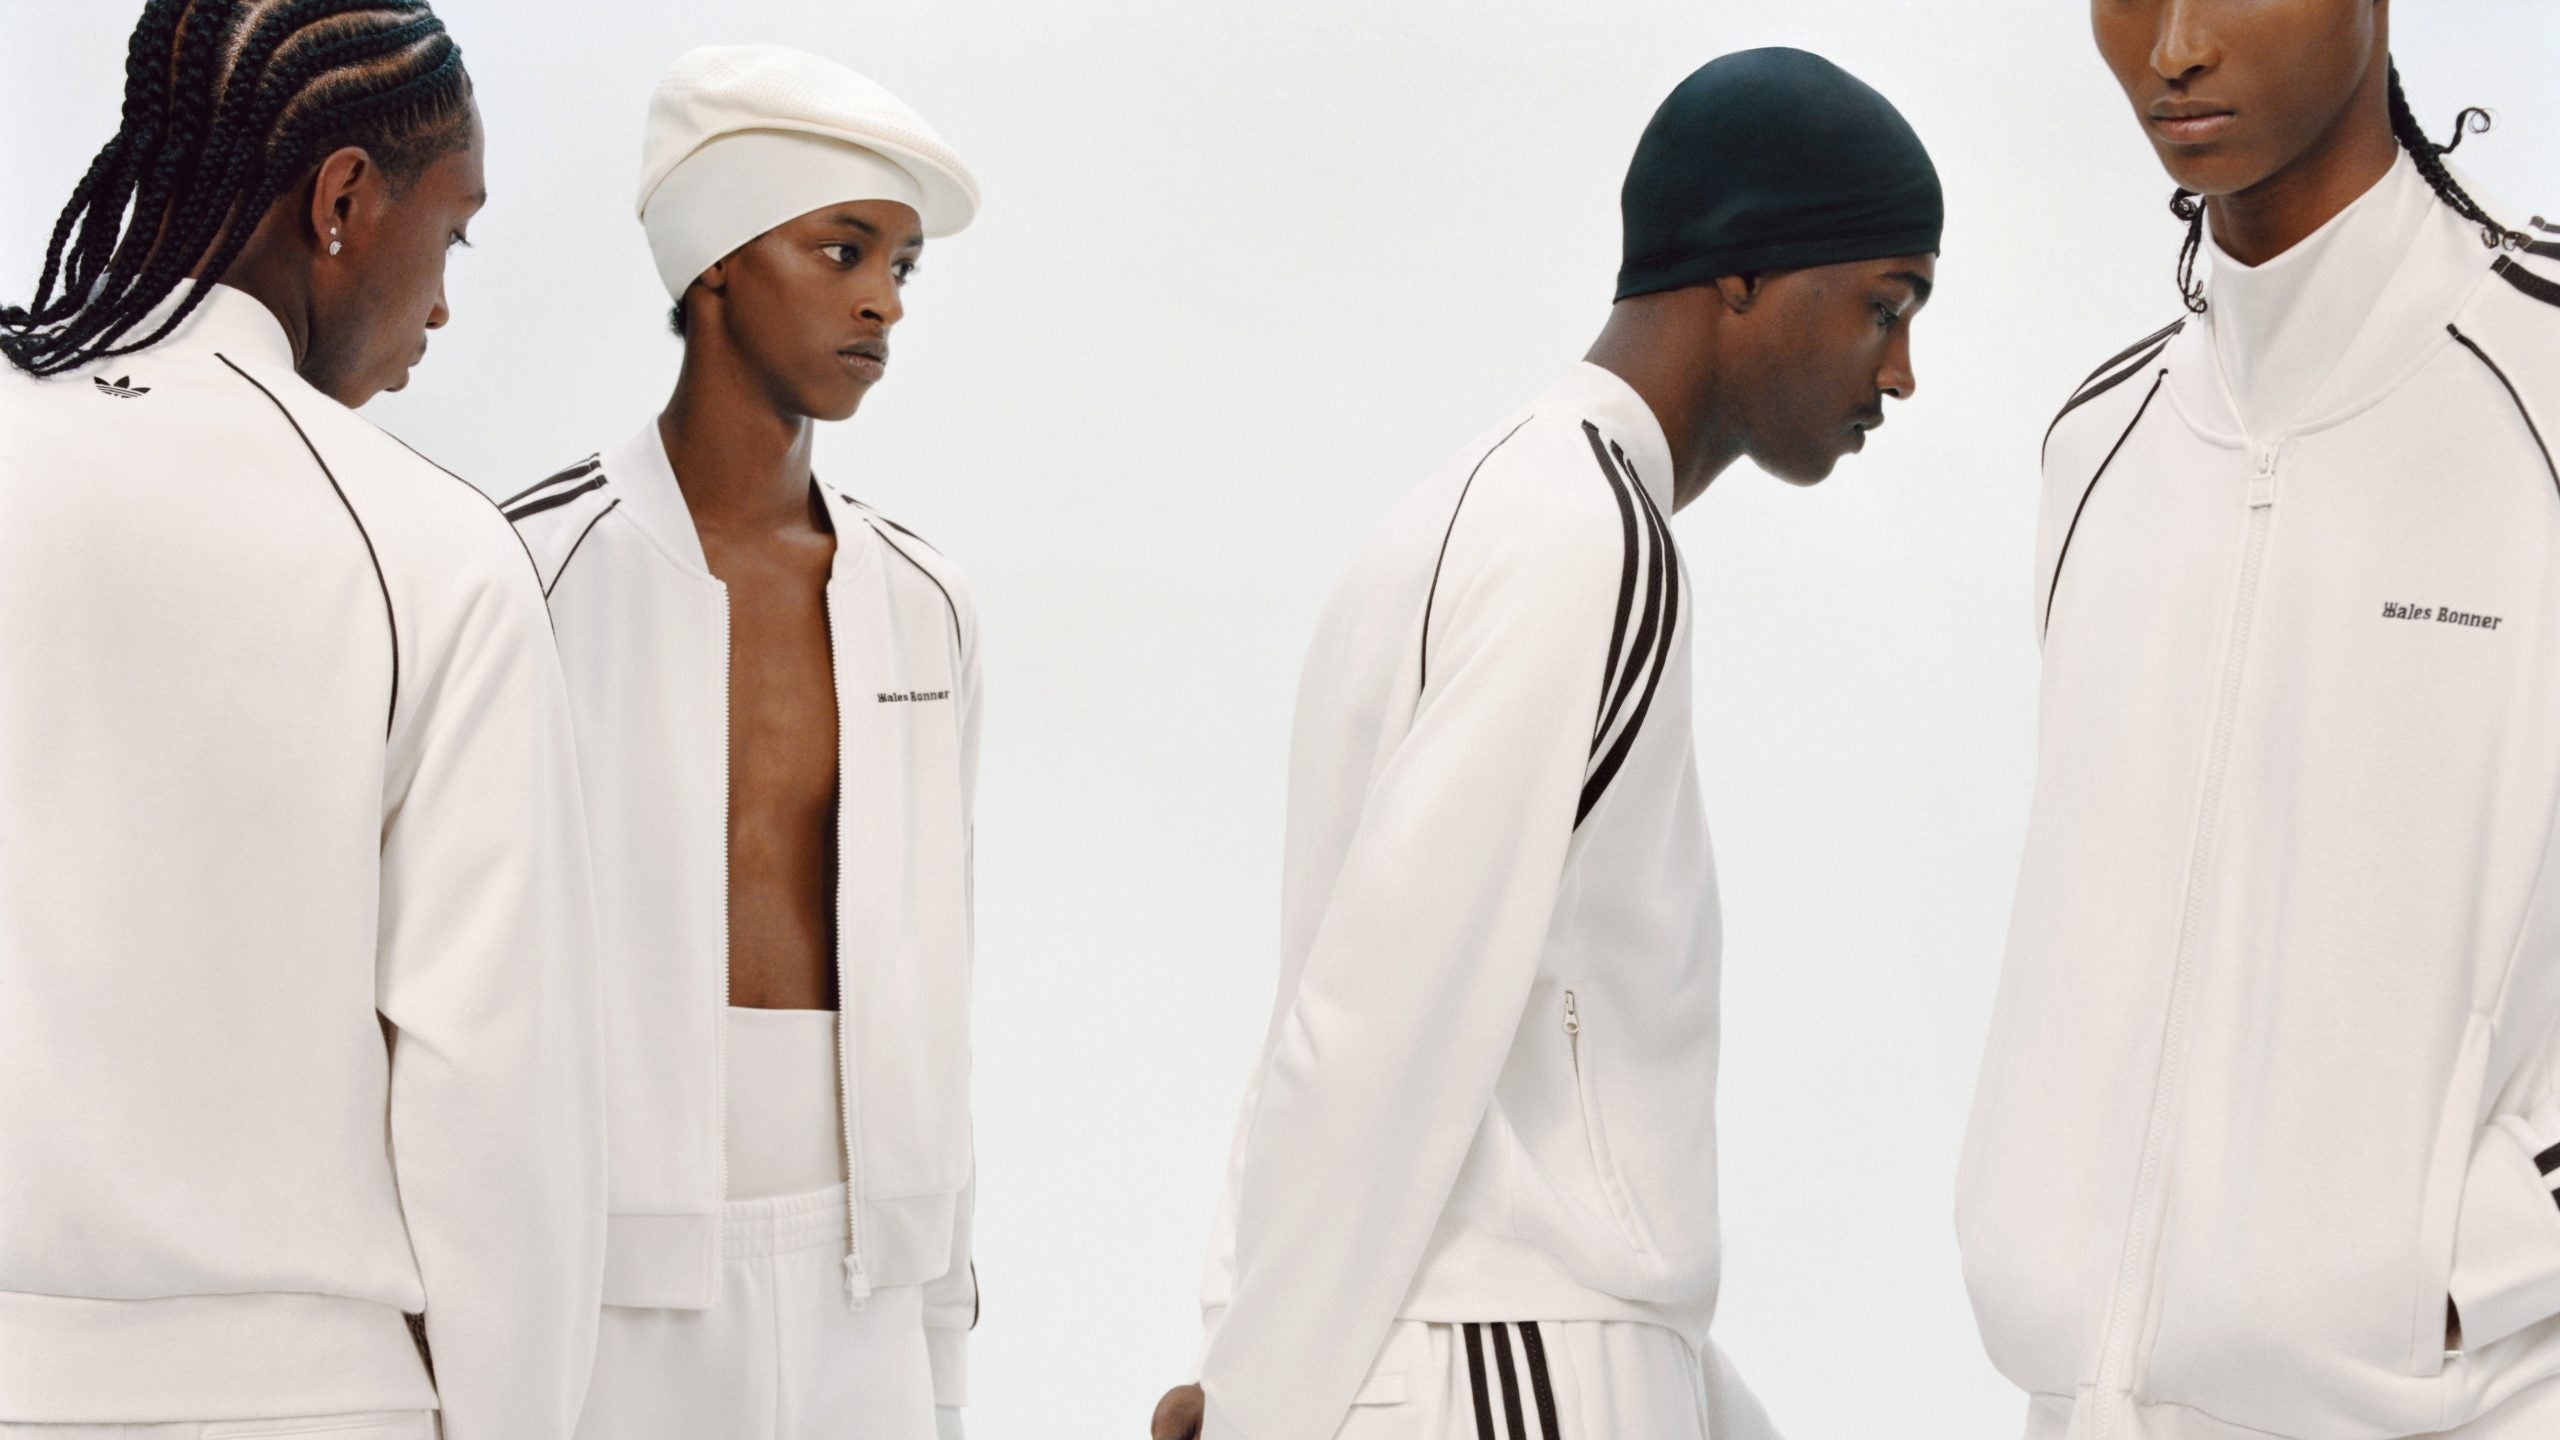 Adidas Originals Taps Wales Bonner For A Collaborative Fall/Winter 2023 Collection